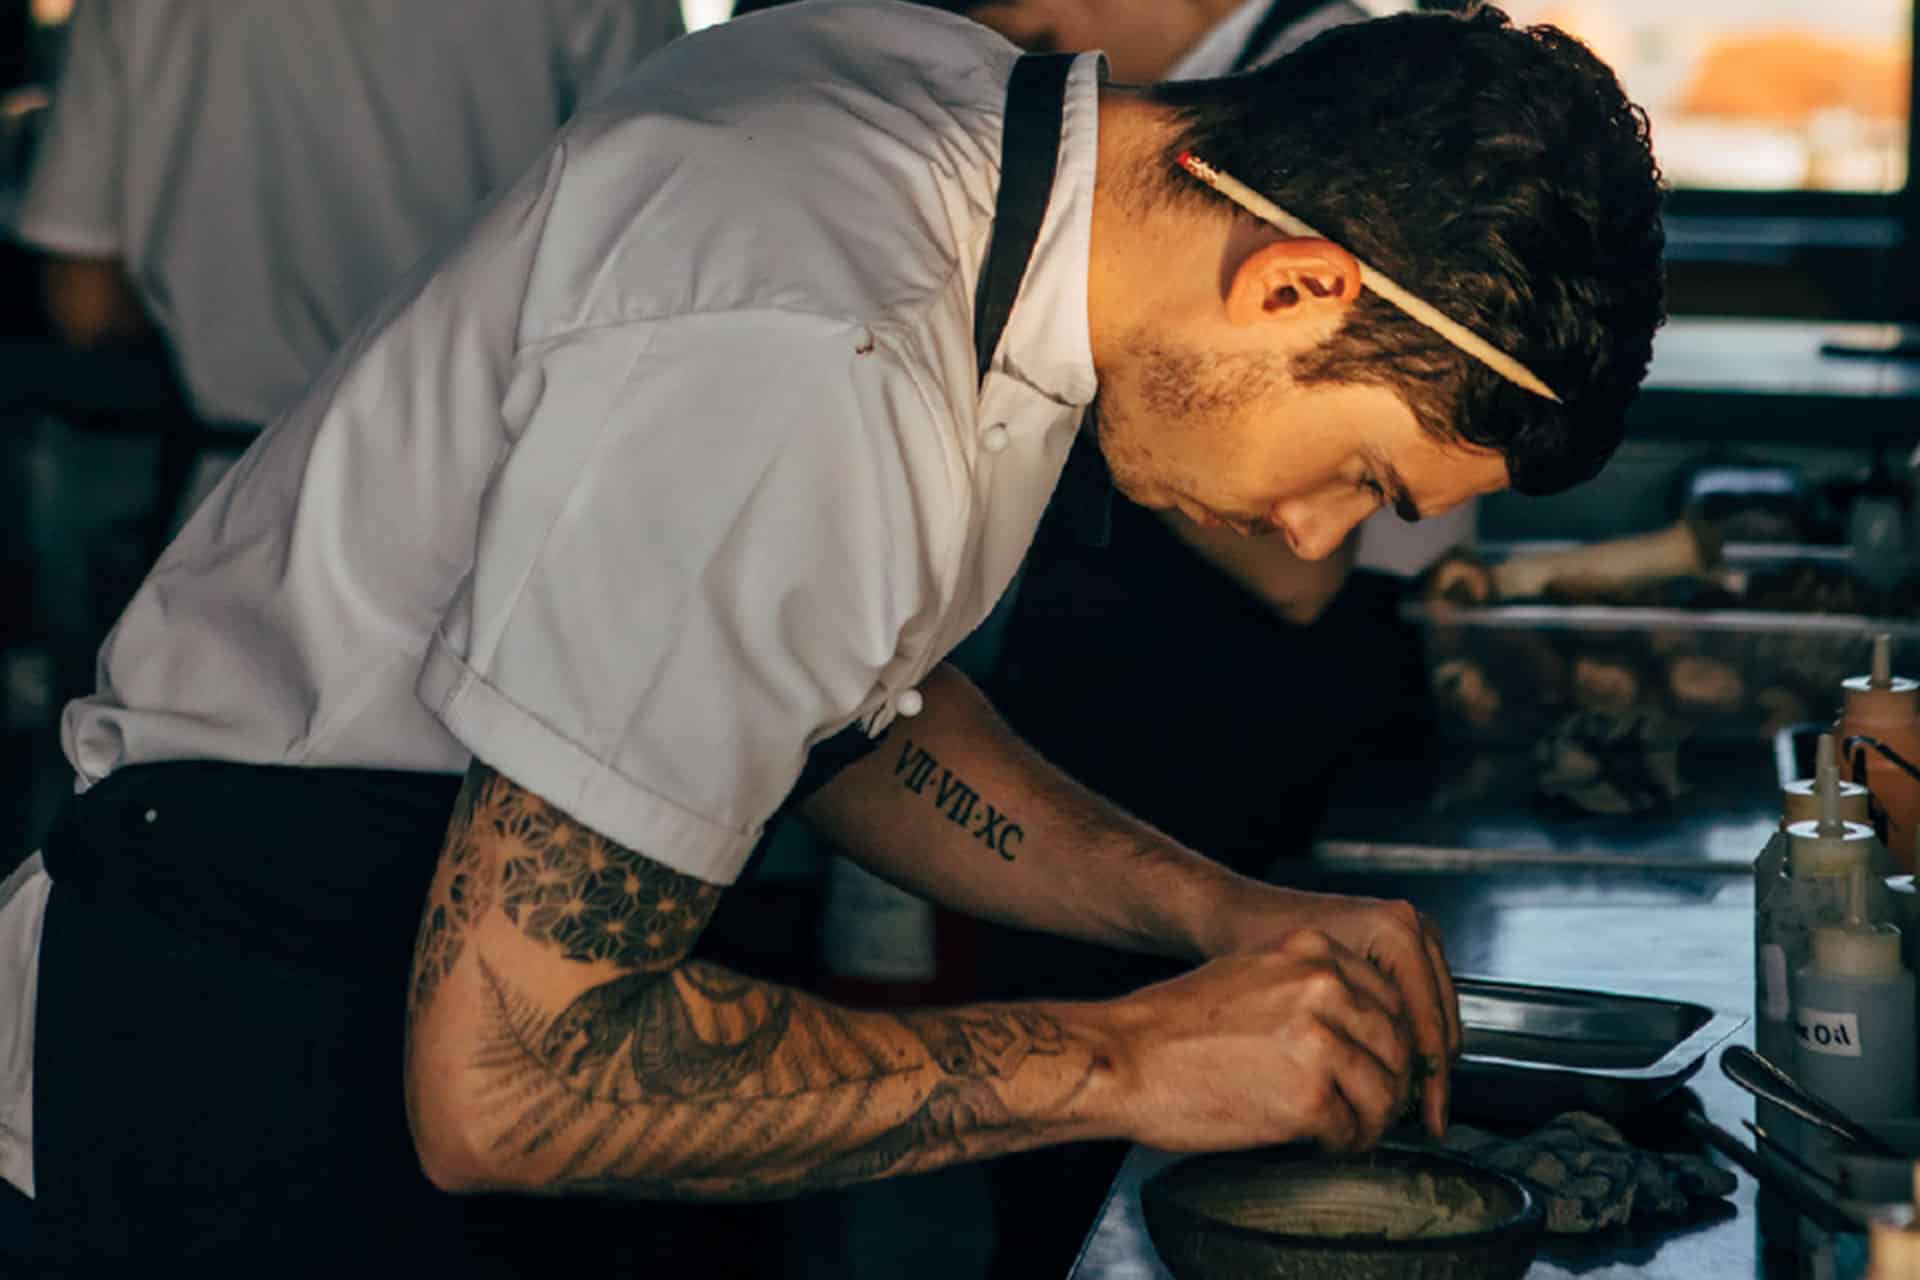 A chef plating food at The Pot Luck Club – one of the top 10 fine dining restaurants in Cape Town.